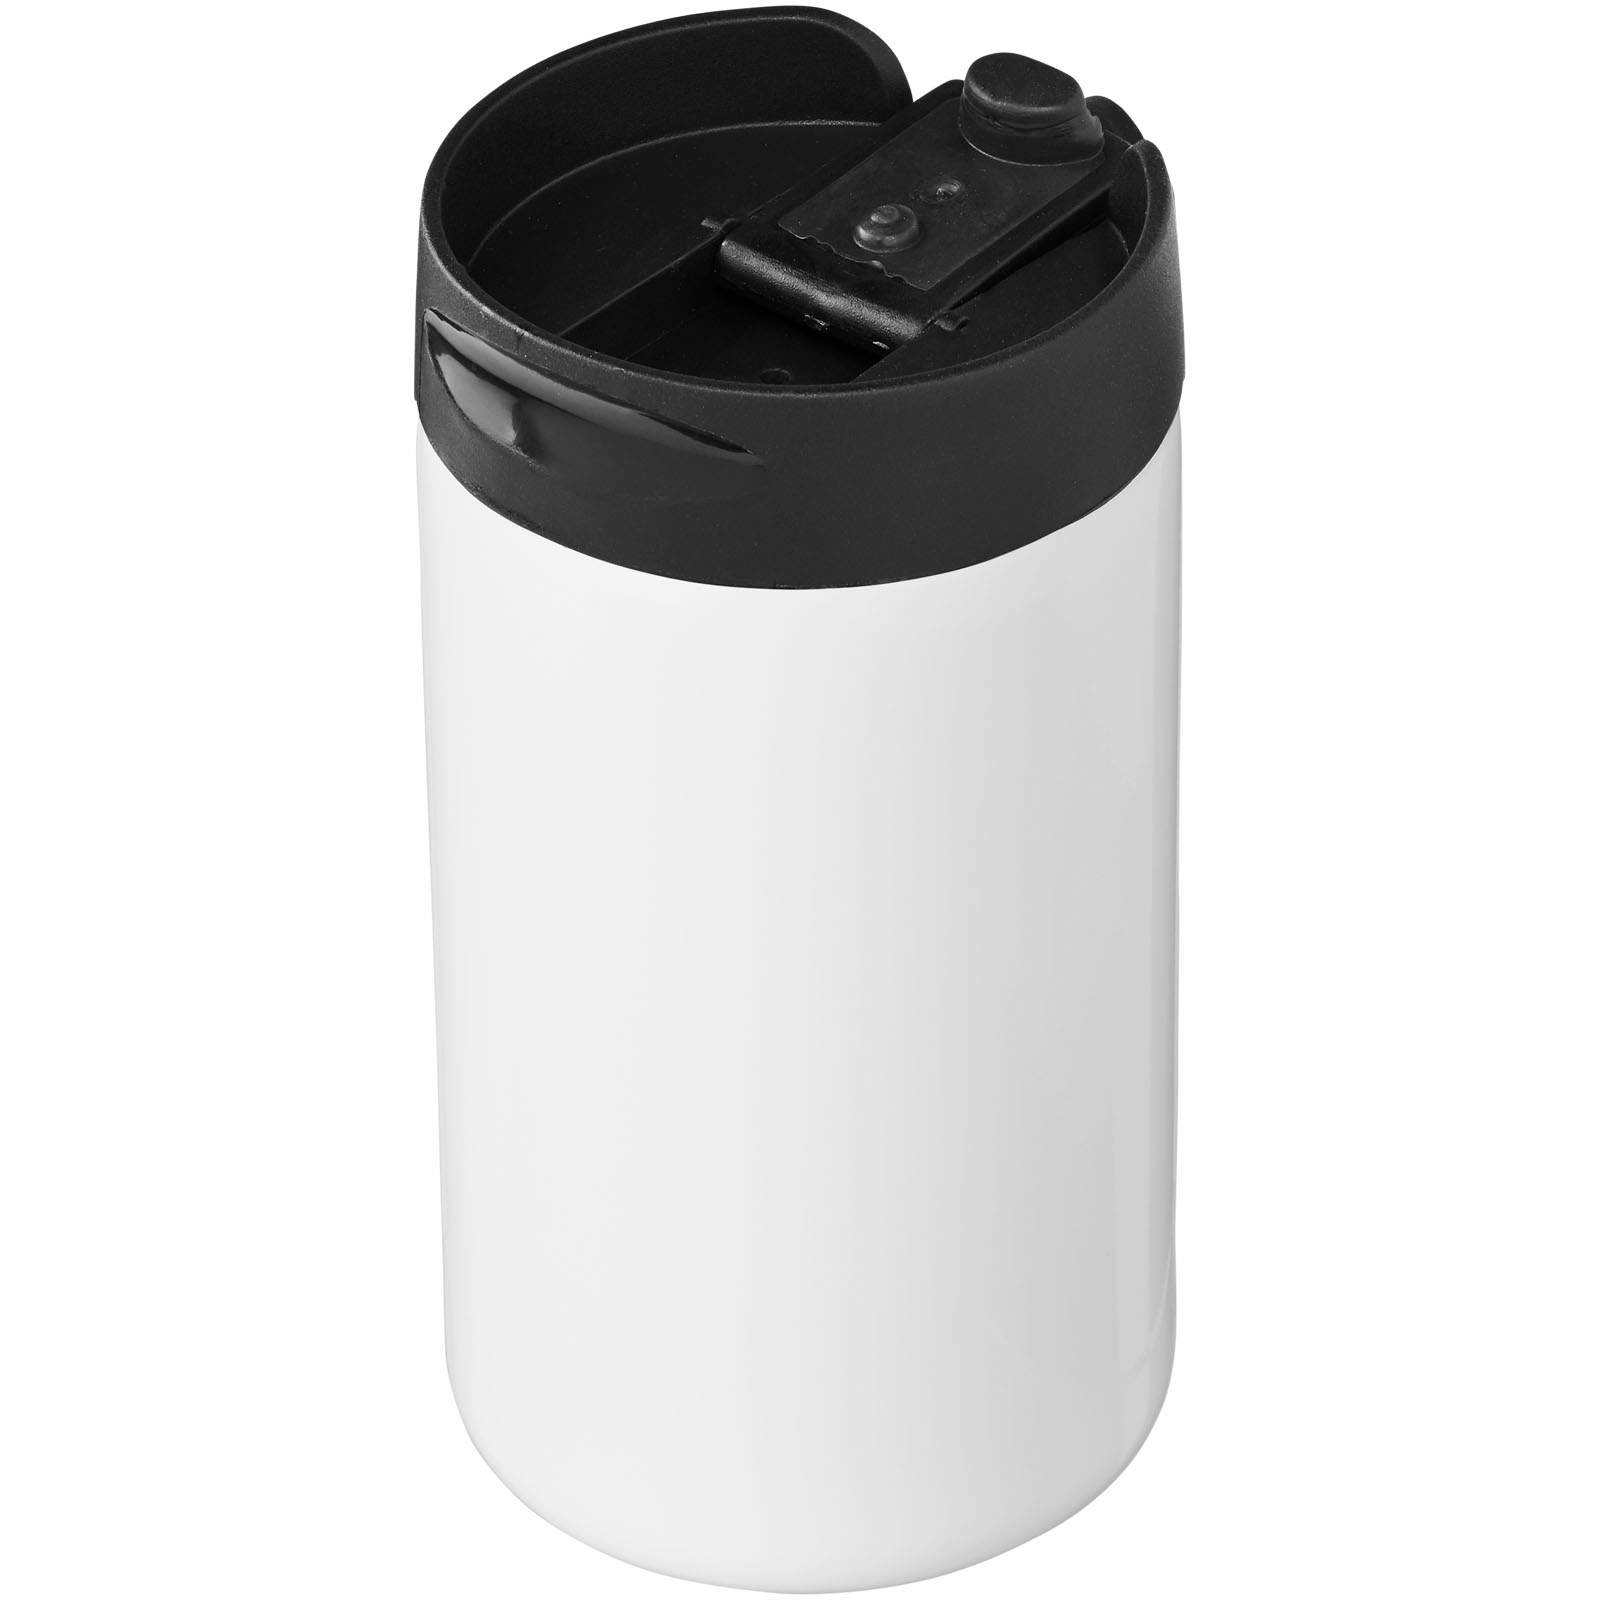 Advertising Travel mugs - Mojave 250 ml RCS certified recycled stainless steel insulated tumbler